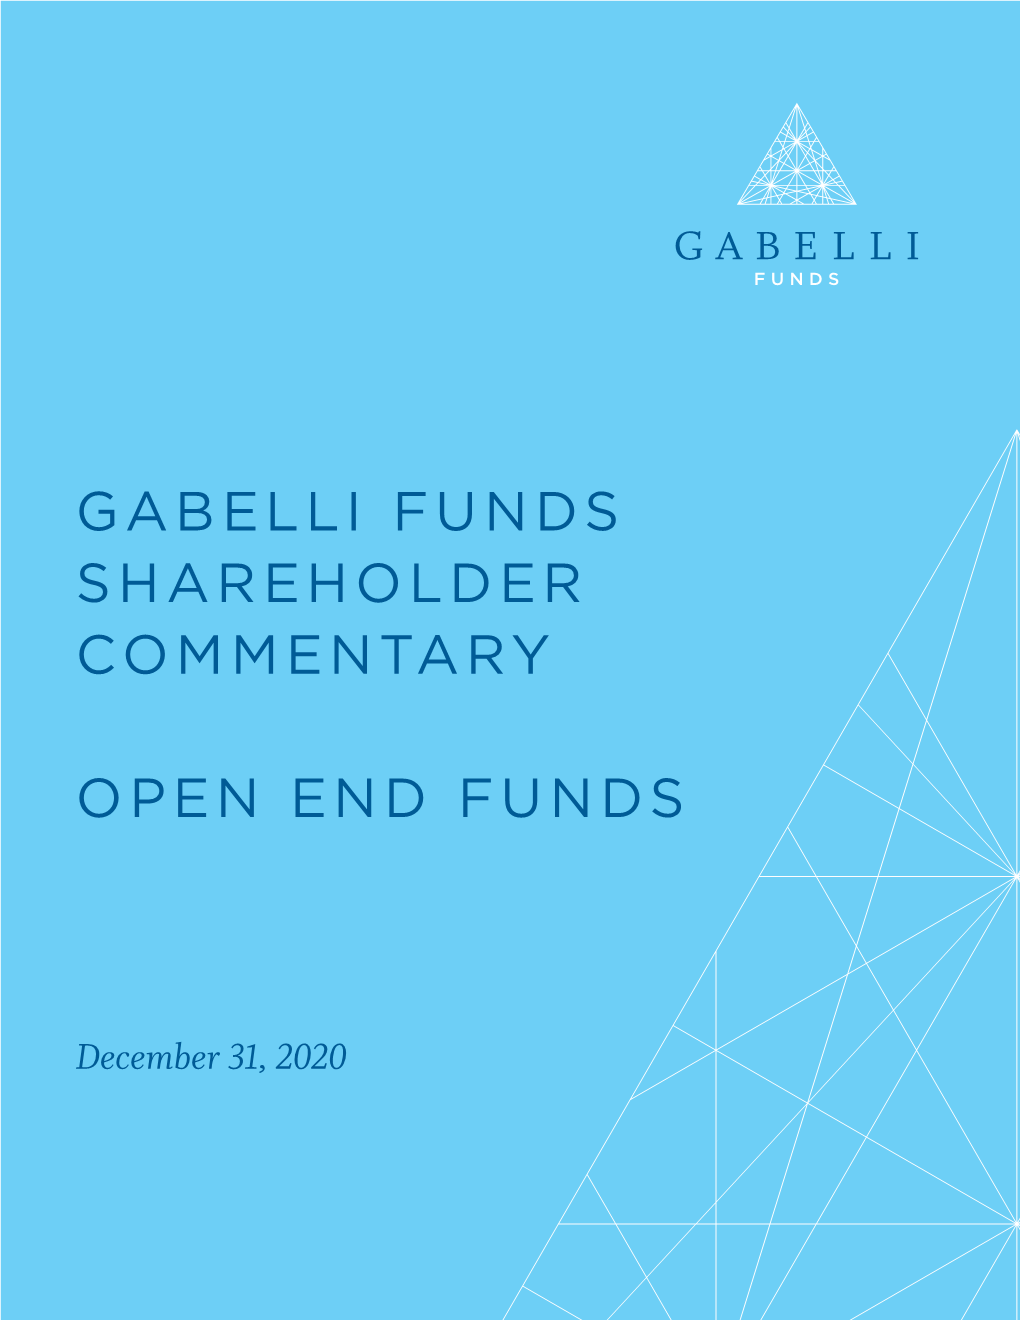 Gabelli Funds Shareholder Commentary Open End Funds